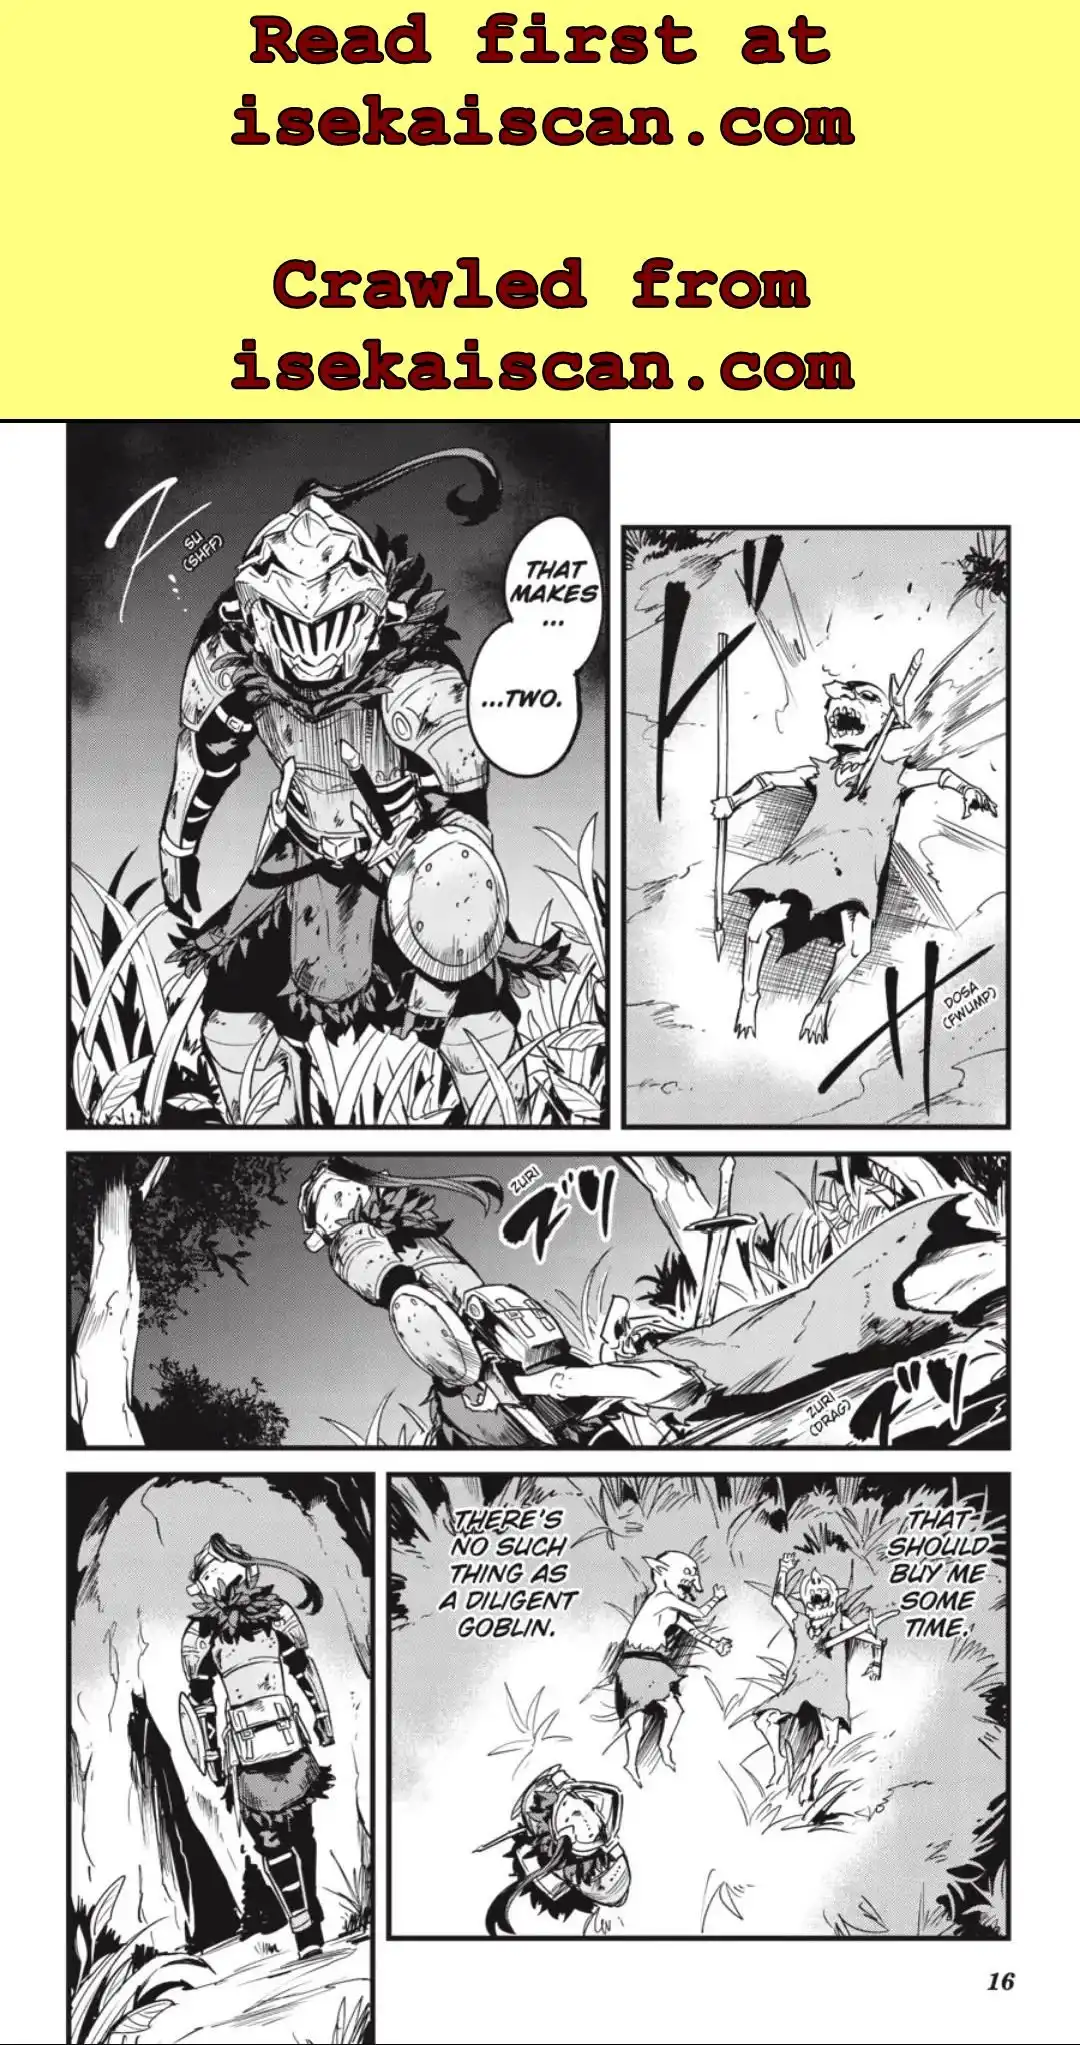 Goblin Slayer: Side Story Year One Chapter 79